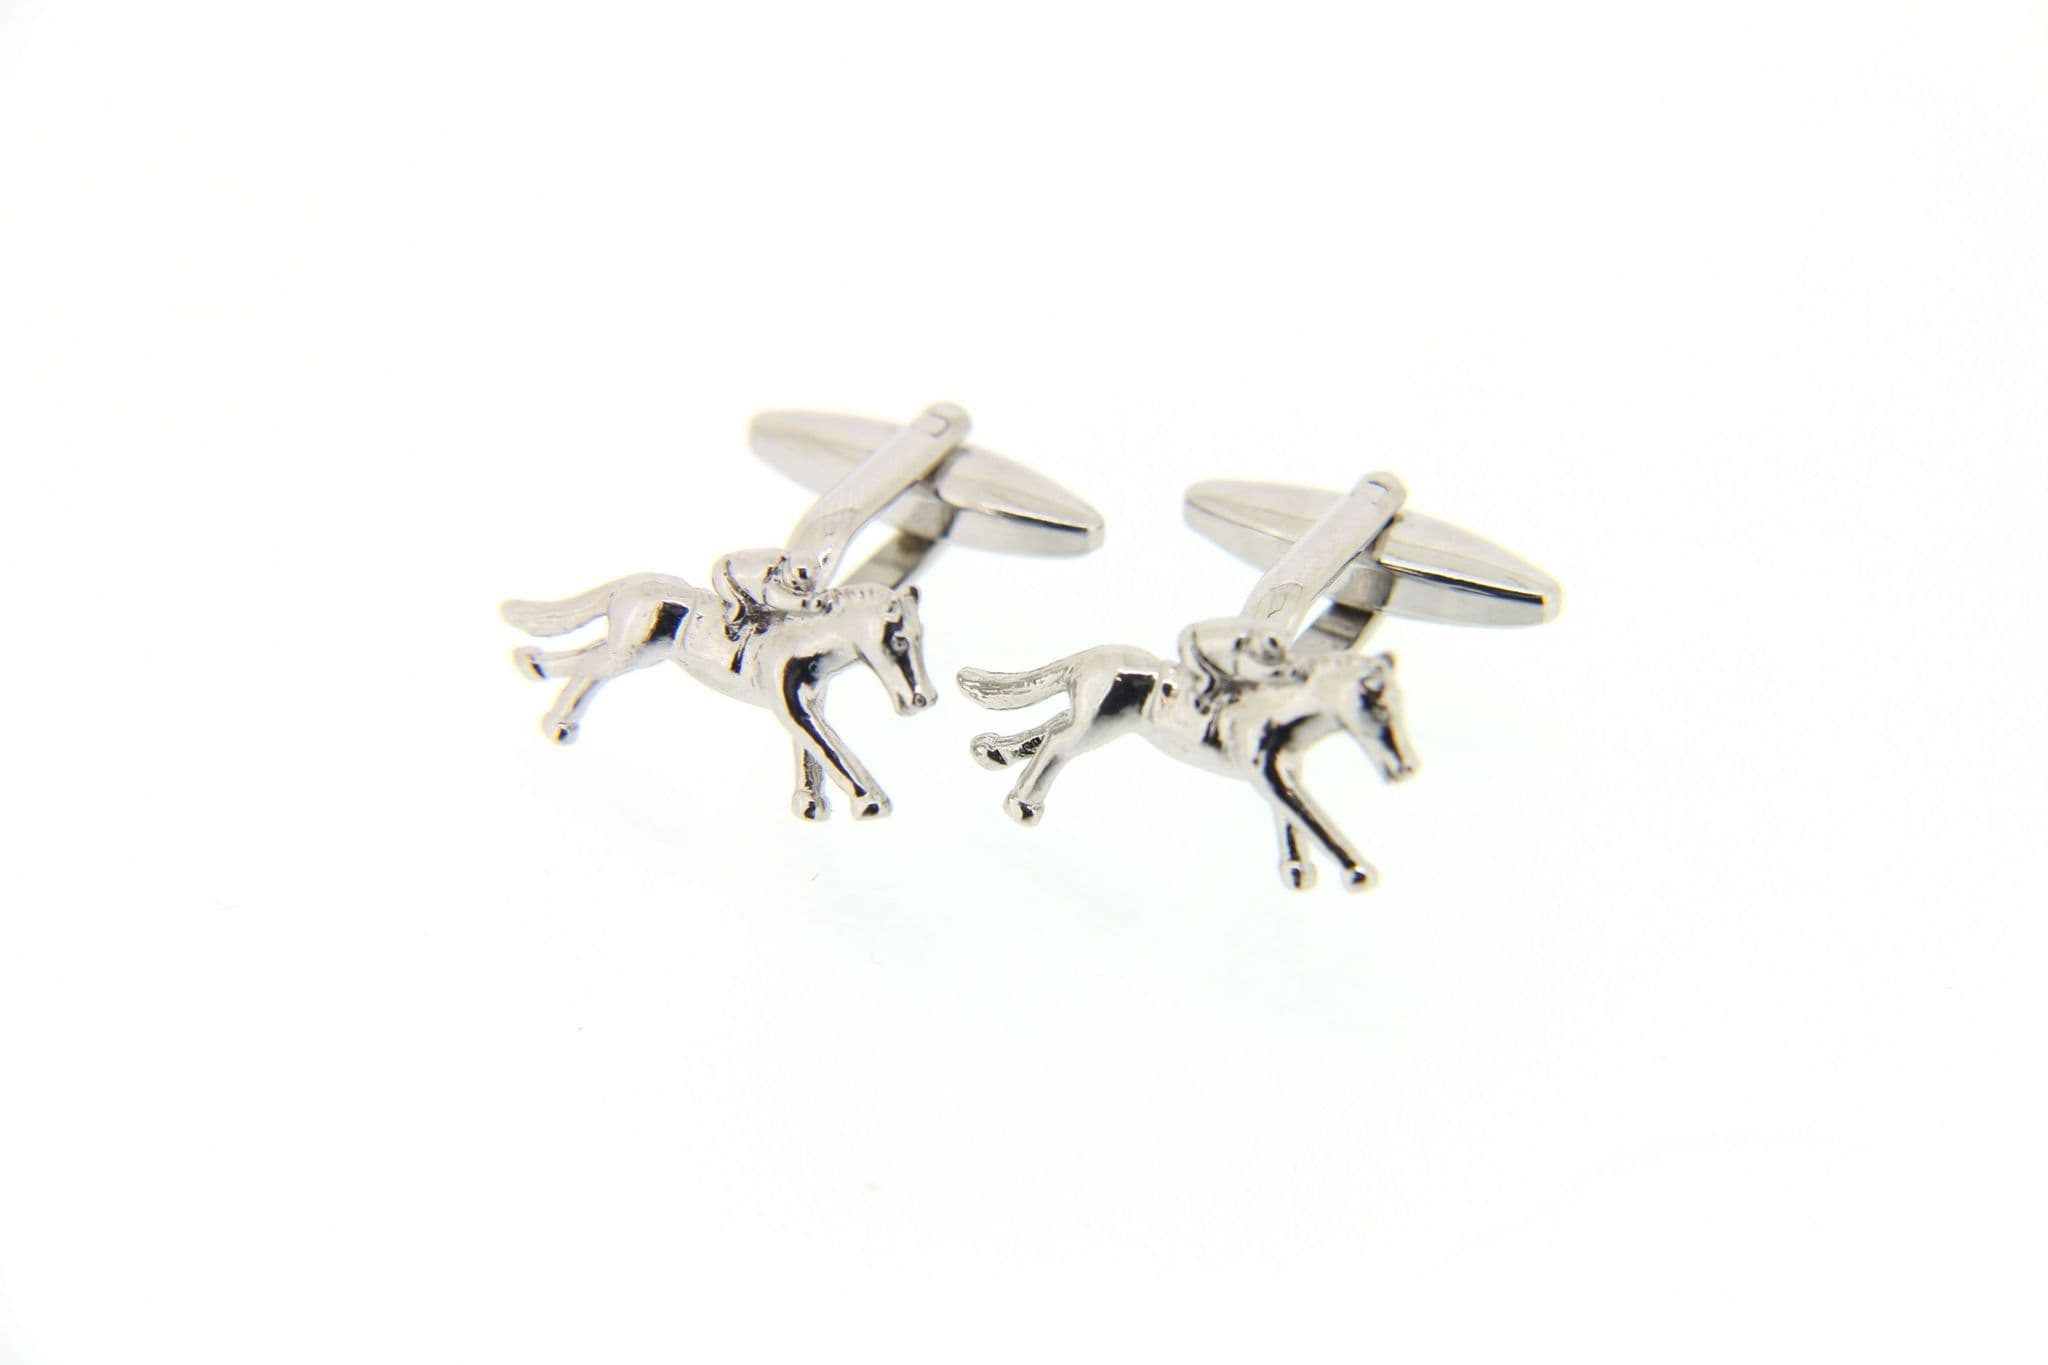 Soprano Racehorse Silver Plated 3D Country Cufflinks